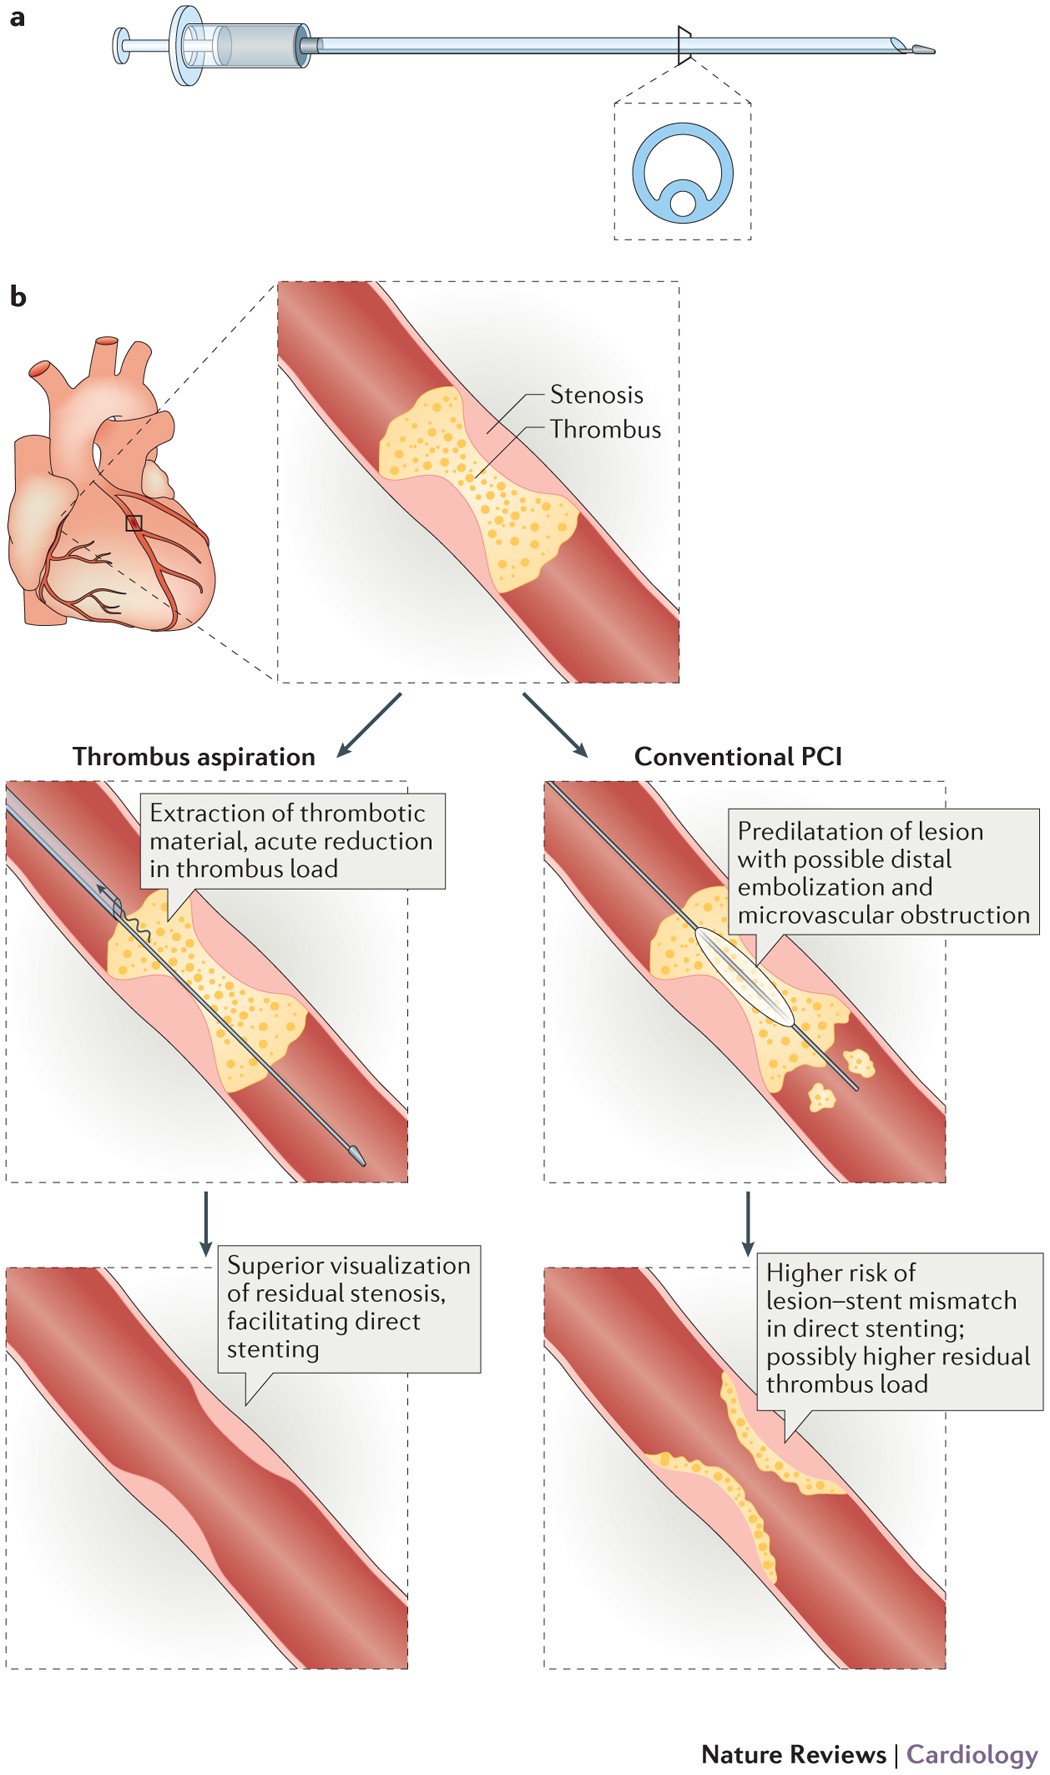 Thrombus aspiration in acute myocardial infarction | Nature Reviews  Cardiology